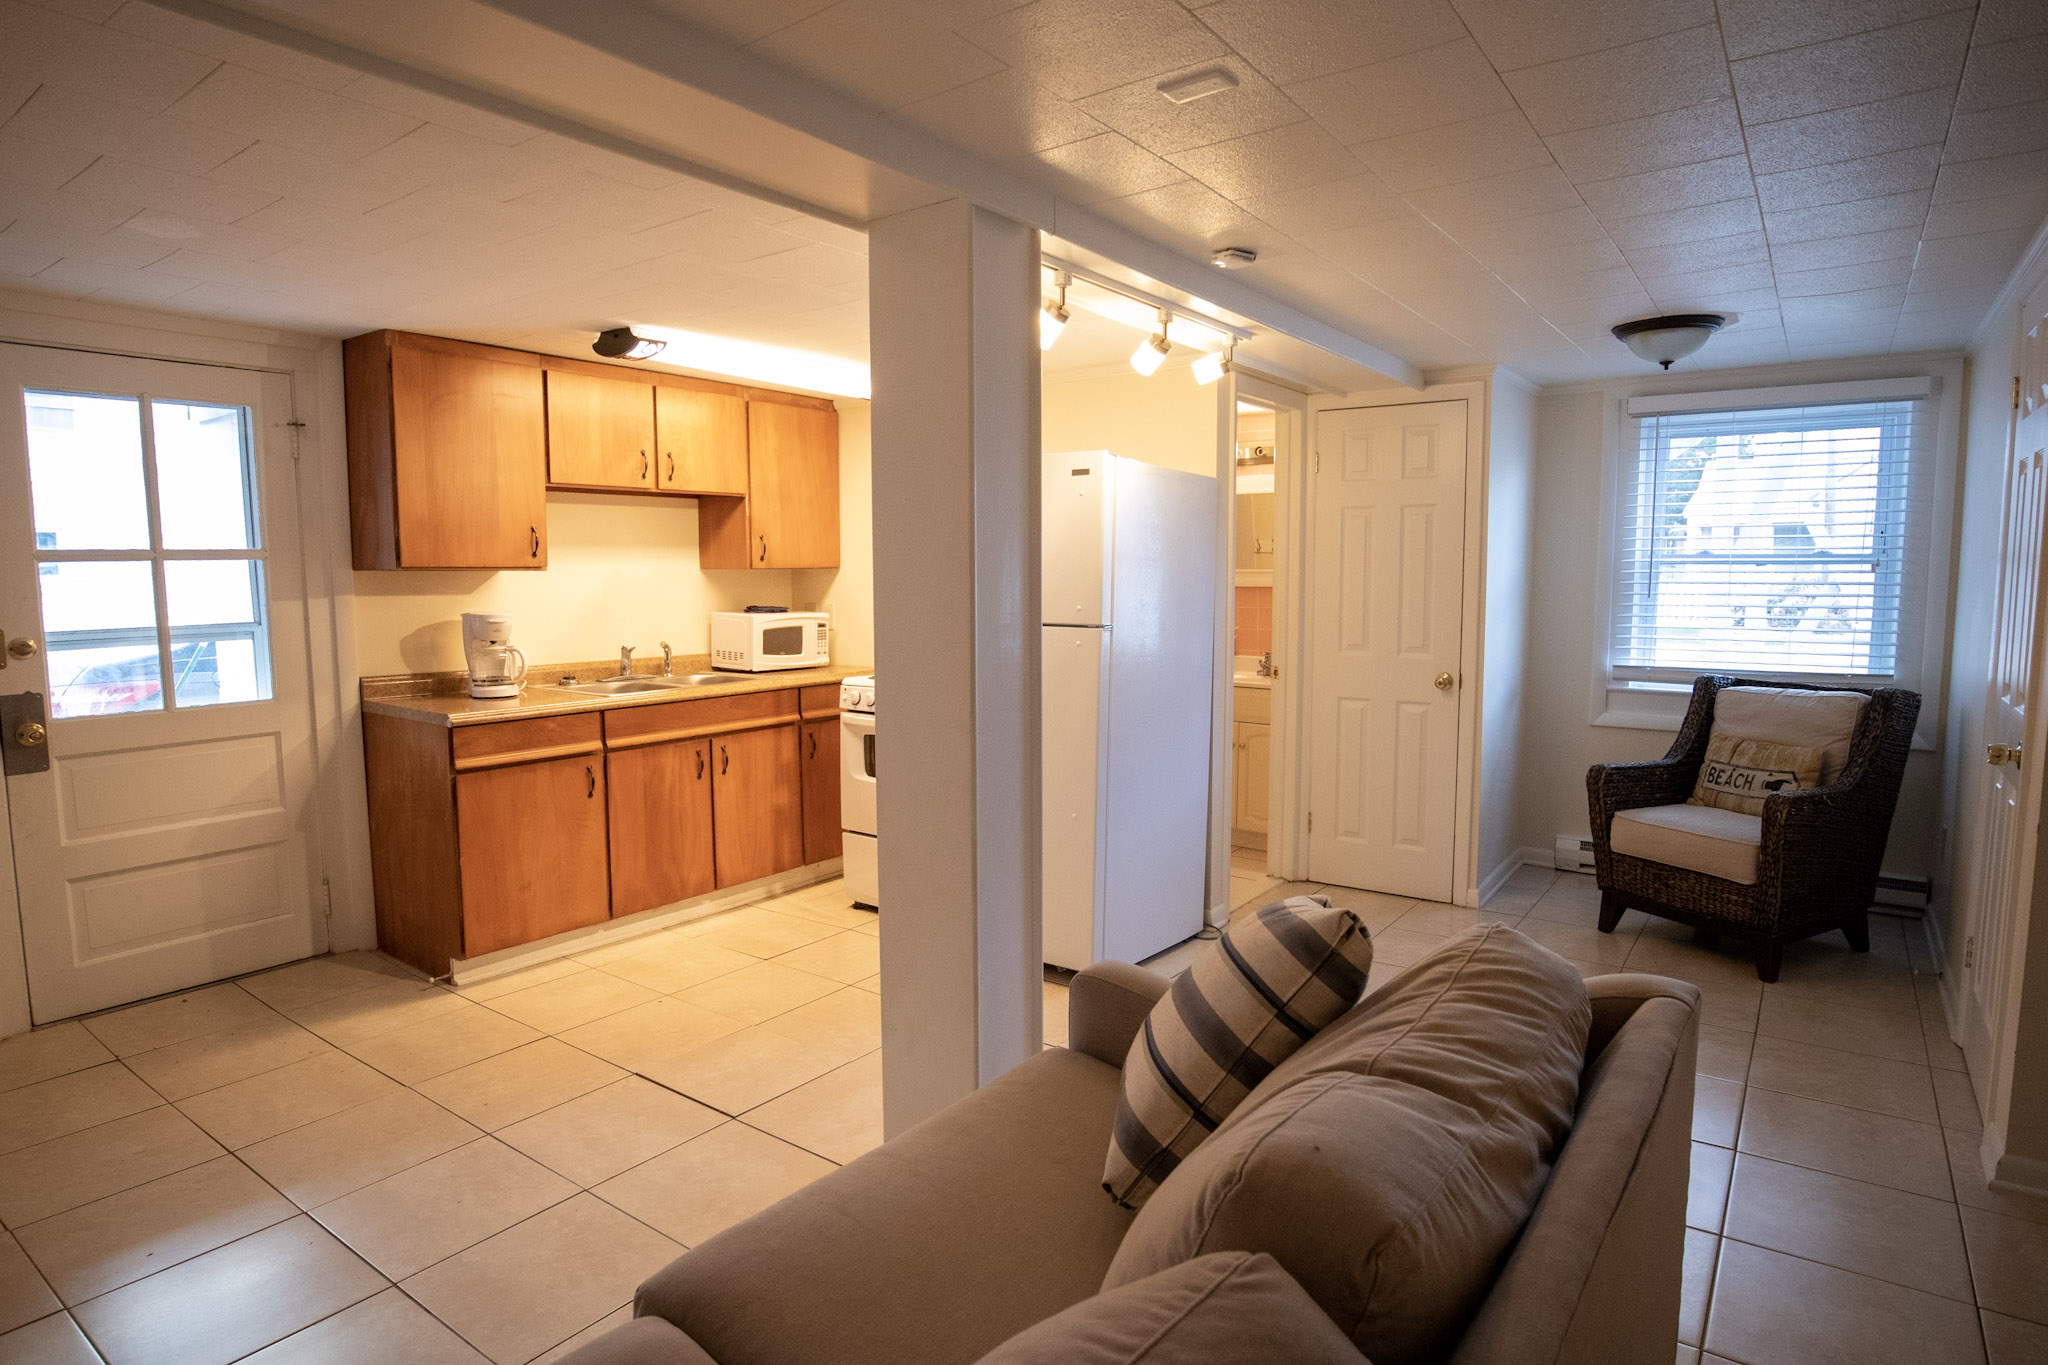 Spacious living room and kitchen in the two bedroom apartment at the Majestic Hotel in Ocean City, Maryland